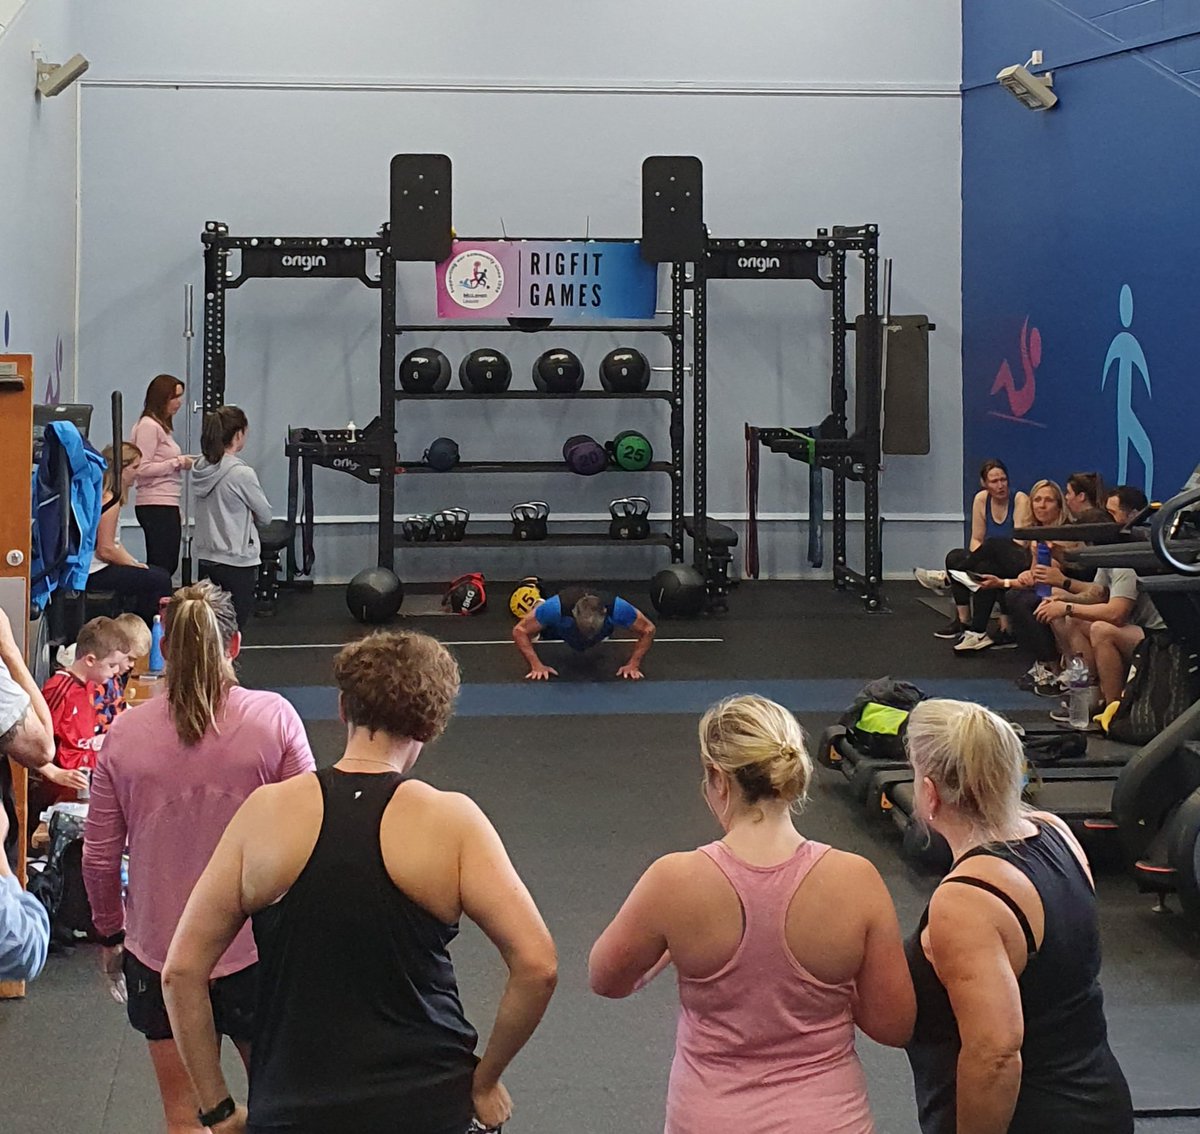 🏋‍♂️🏋‍♀️RigFit Games in full swing! Our singles competitors are giving it their all 💪🏆 #RigFitGames